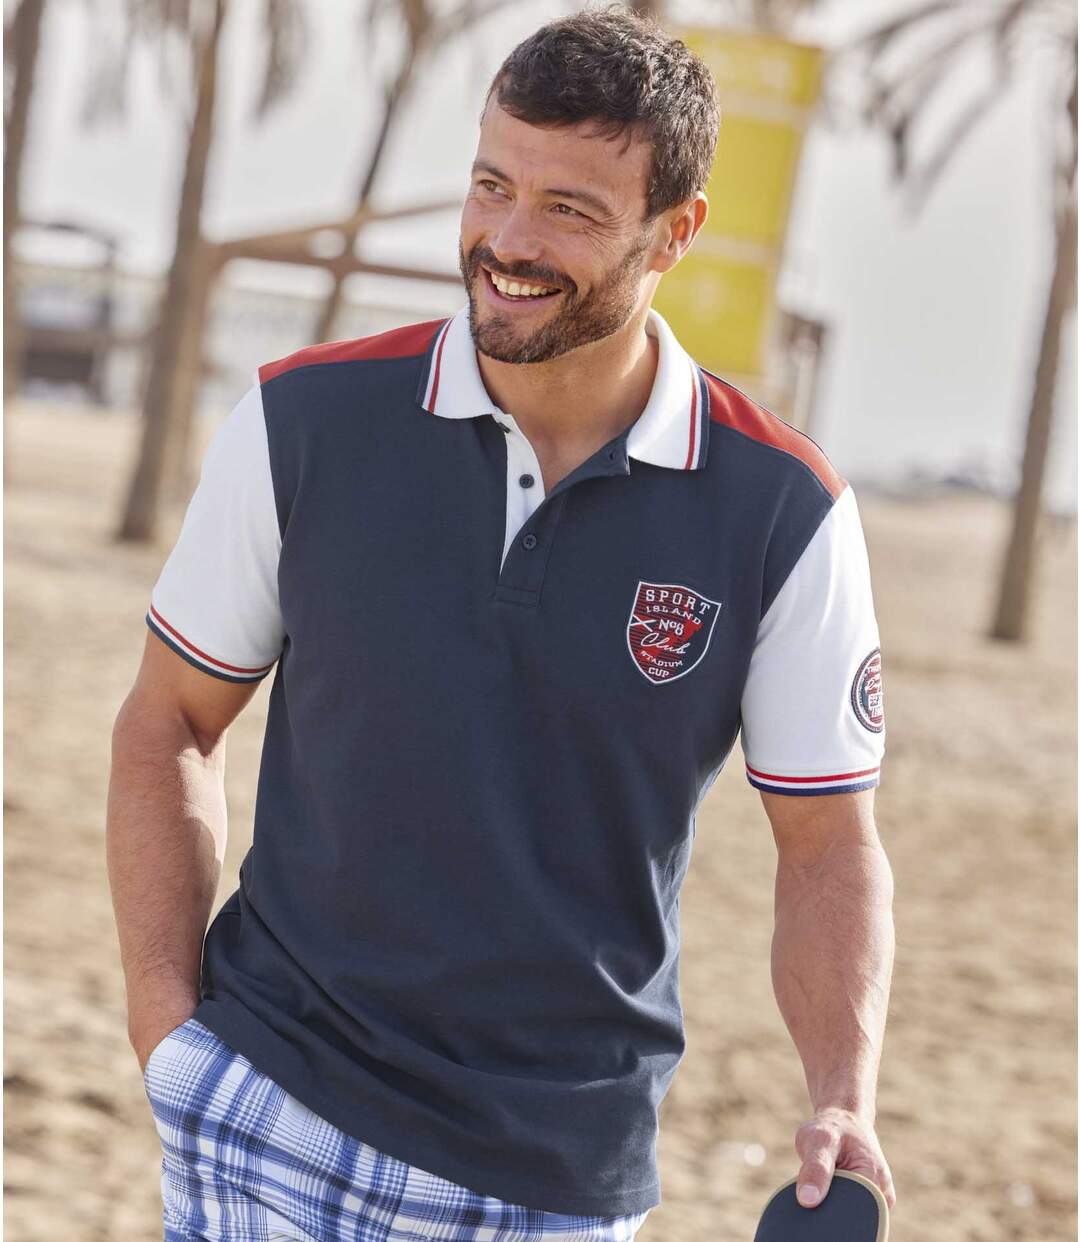 Men's Rugby-Style Polo Shirt Atlas For Men